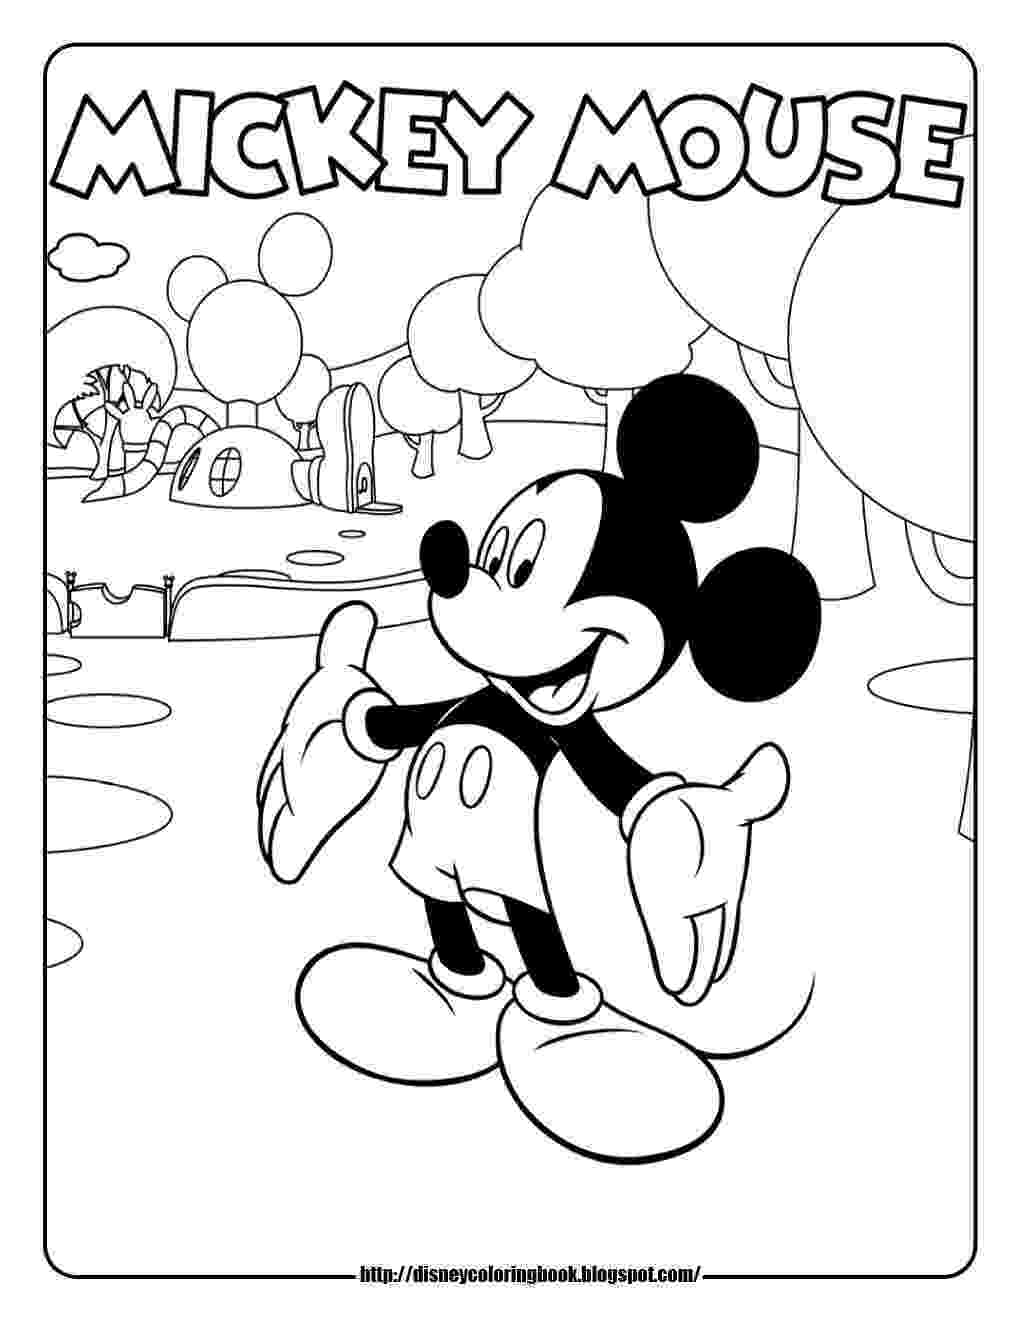 mickey mouse clubhouse coloring sheets disney coloring pages sheets coloring mouse mickey clubhouse 